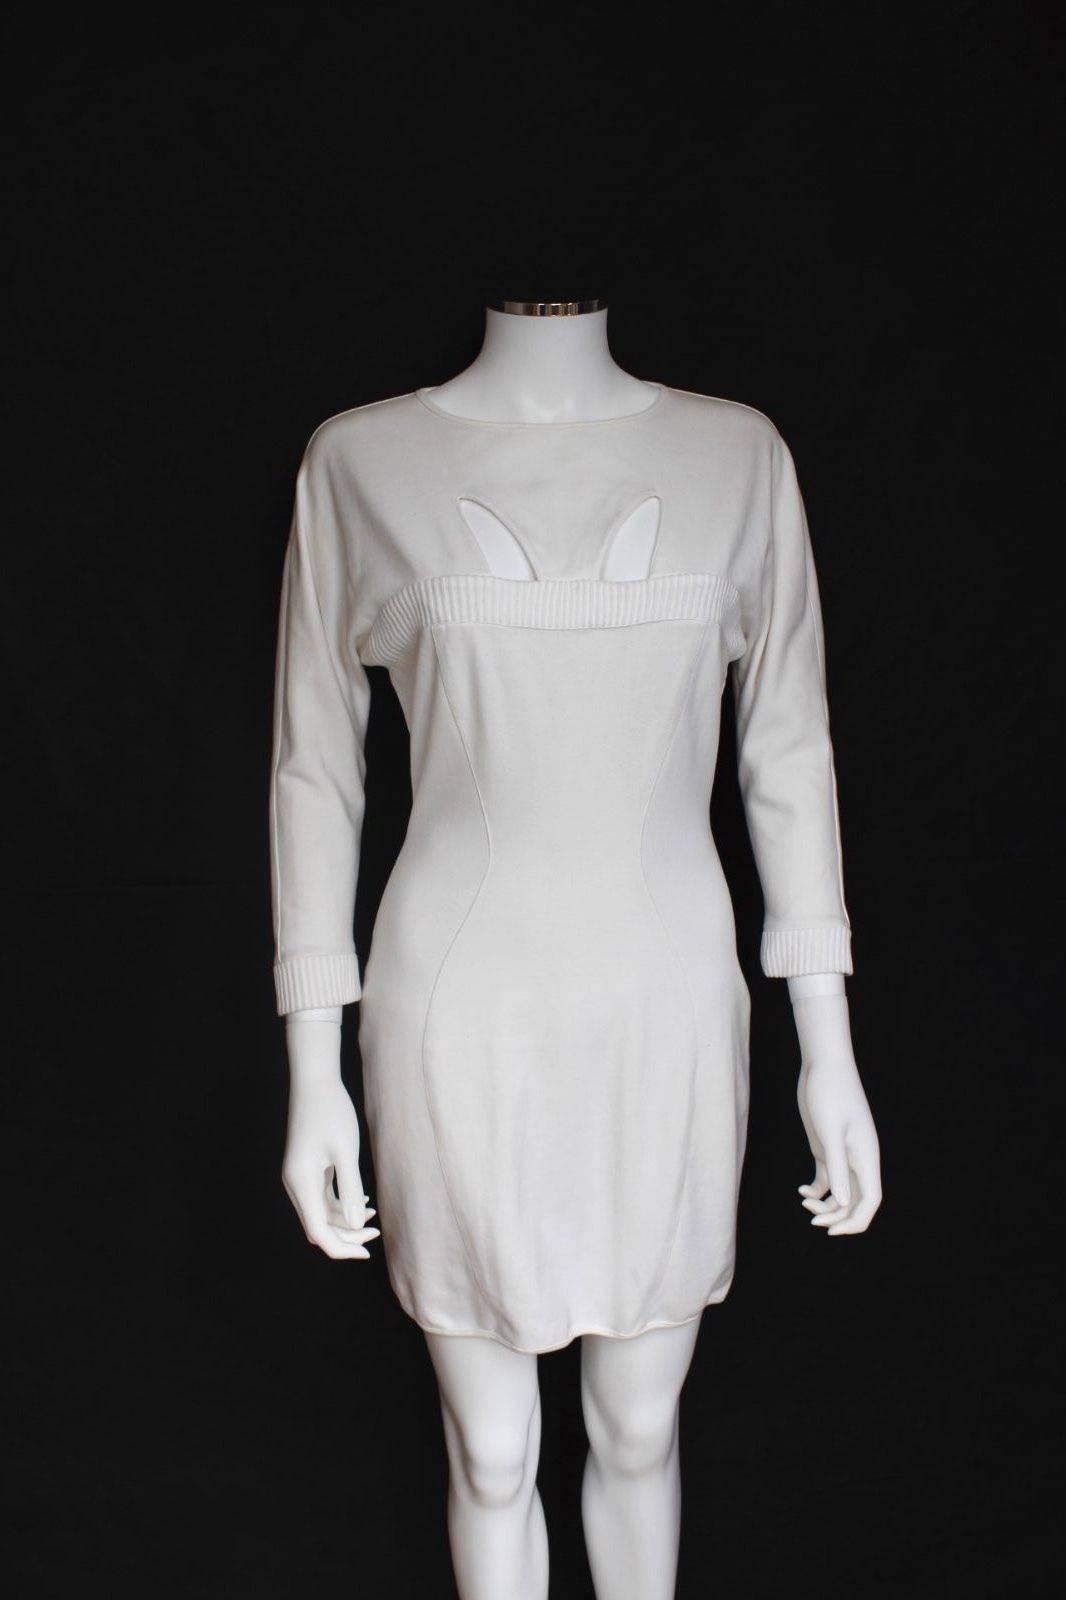 Terry Mugler Vintage White Cut Out Stretch Dress 44
Vintage dress from Terry Mugler featuring cut out detail to the front with ribbed trim
Long sleeves, zip fastening to the back 
Full length 33 inches, chest 17 inches across, waist 13 inches